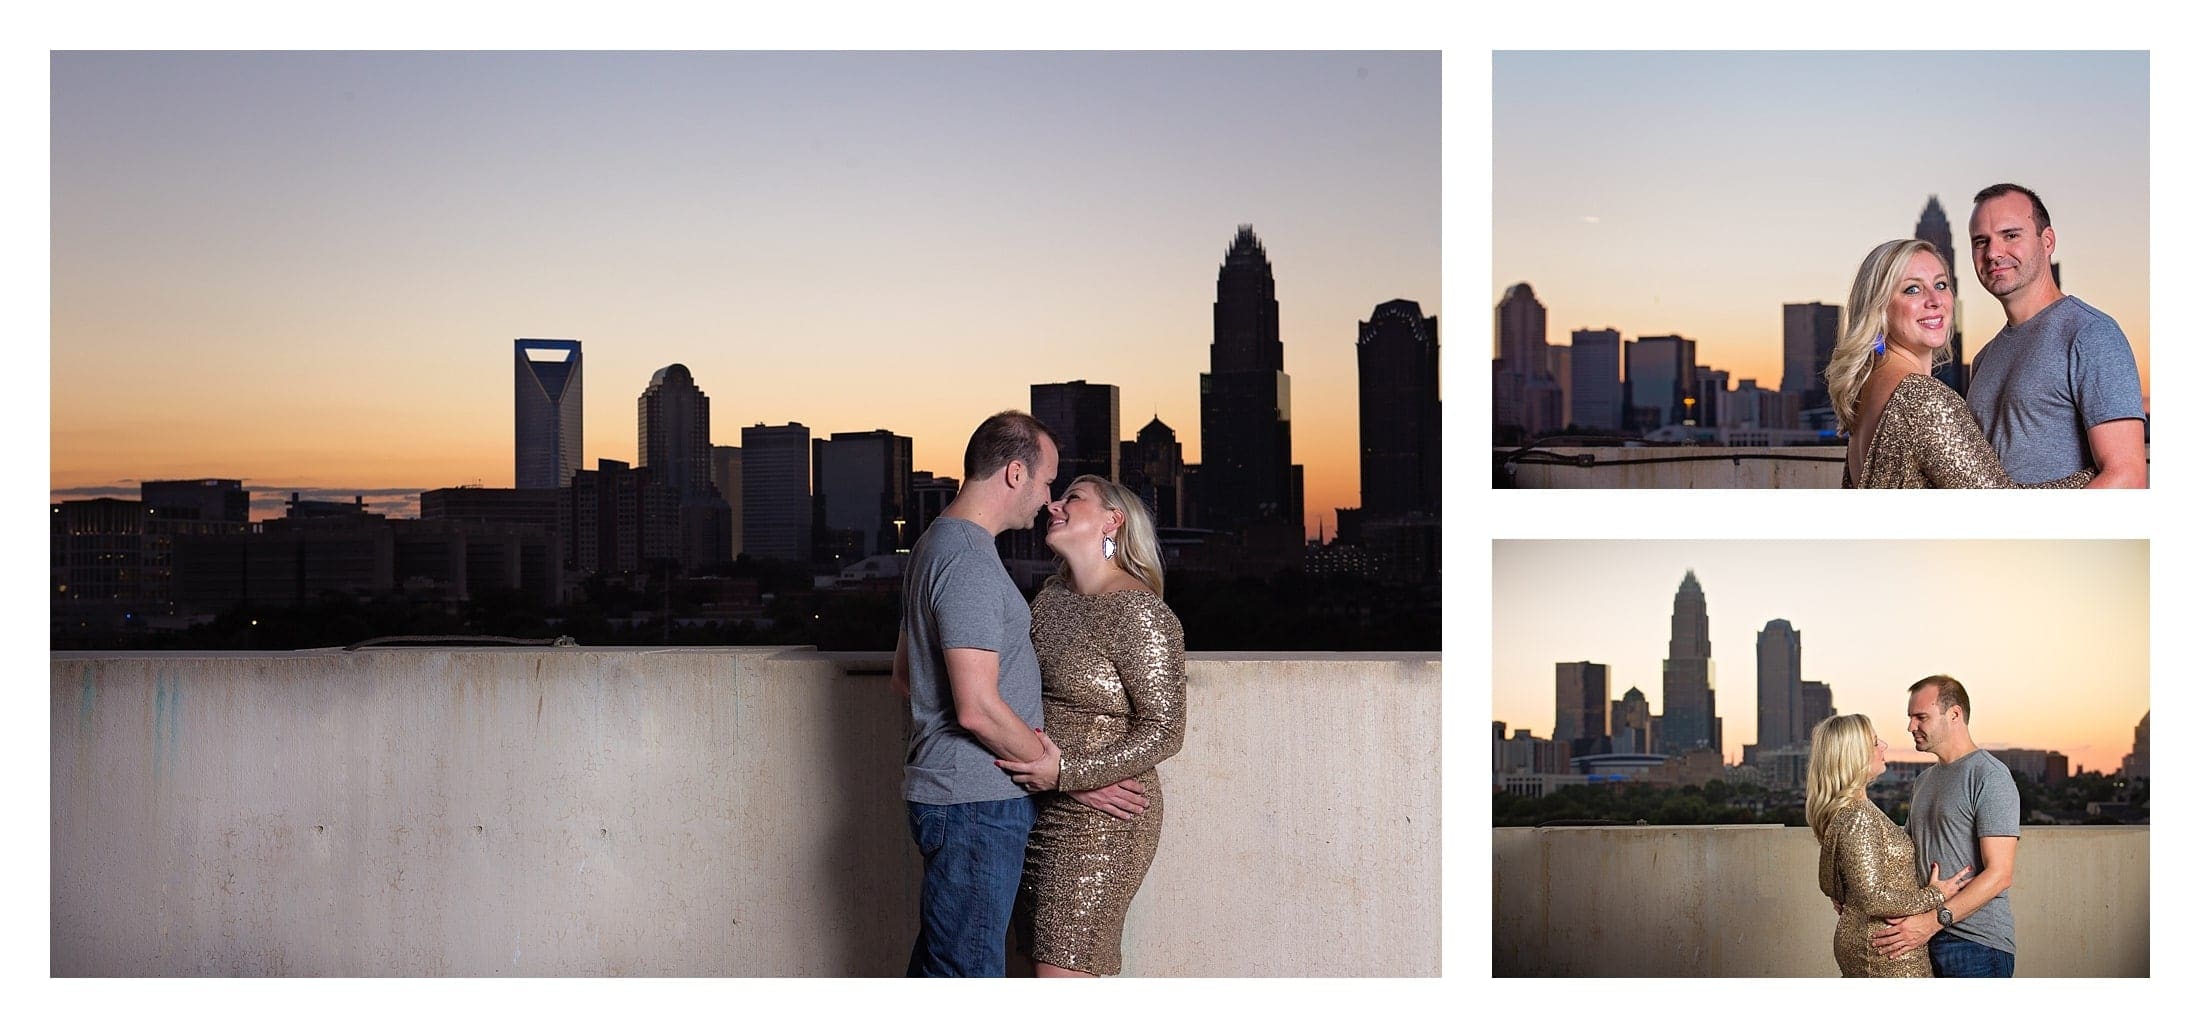 Sequin dress engagement session, Downtown Charlotte at Sunset, Engagement Photography Charlotte NC, Asheville Photographer takes Engagement pictures in Charlotte